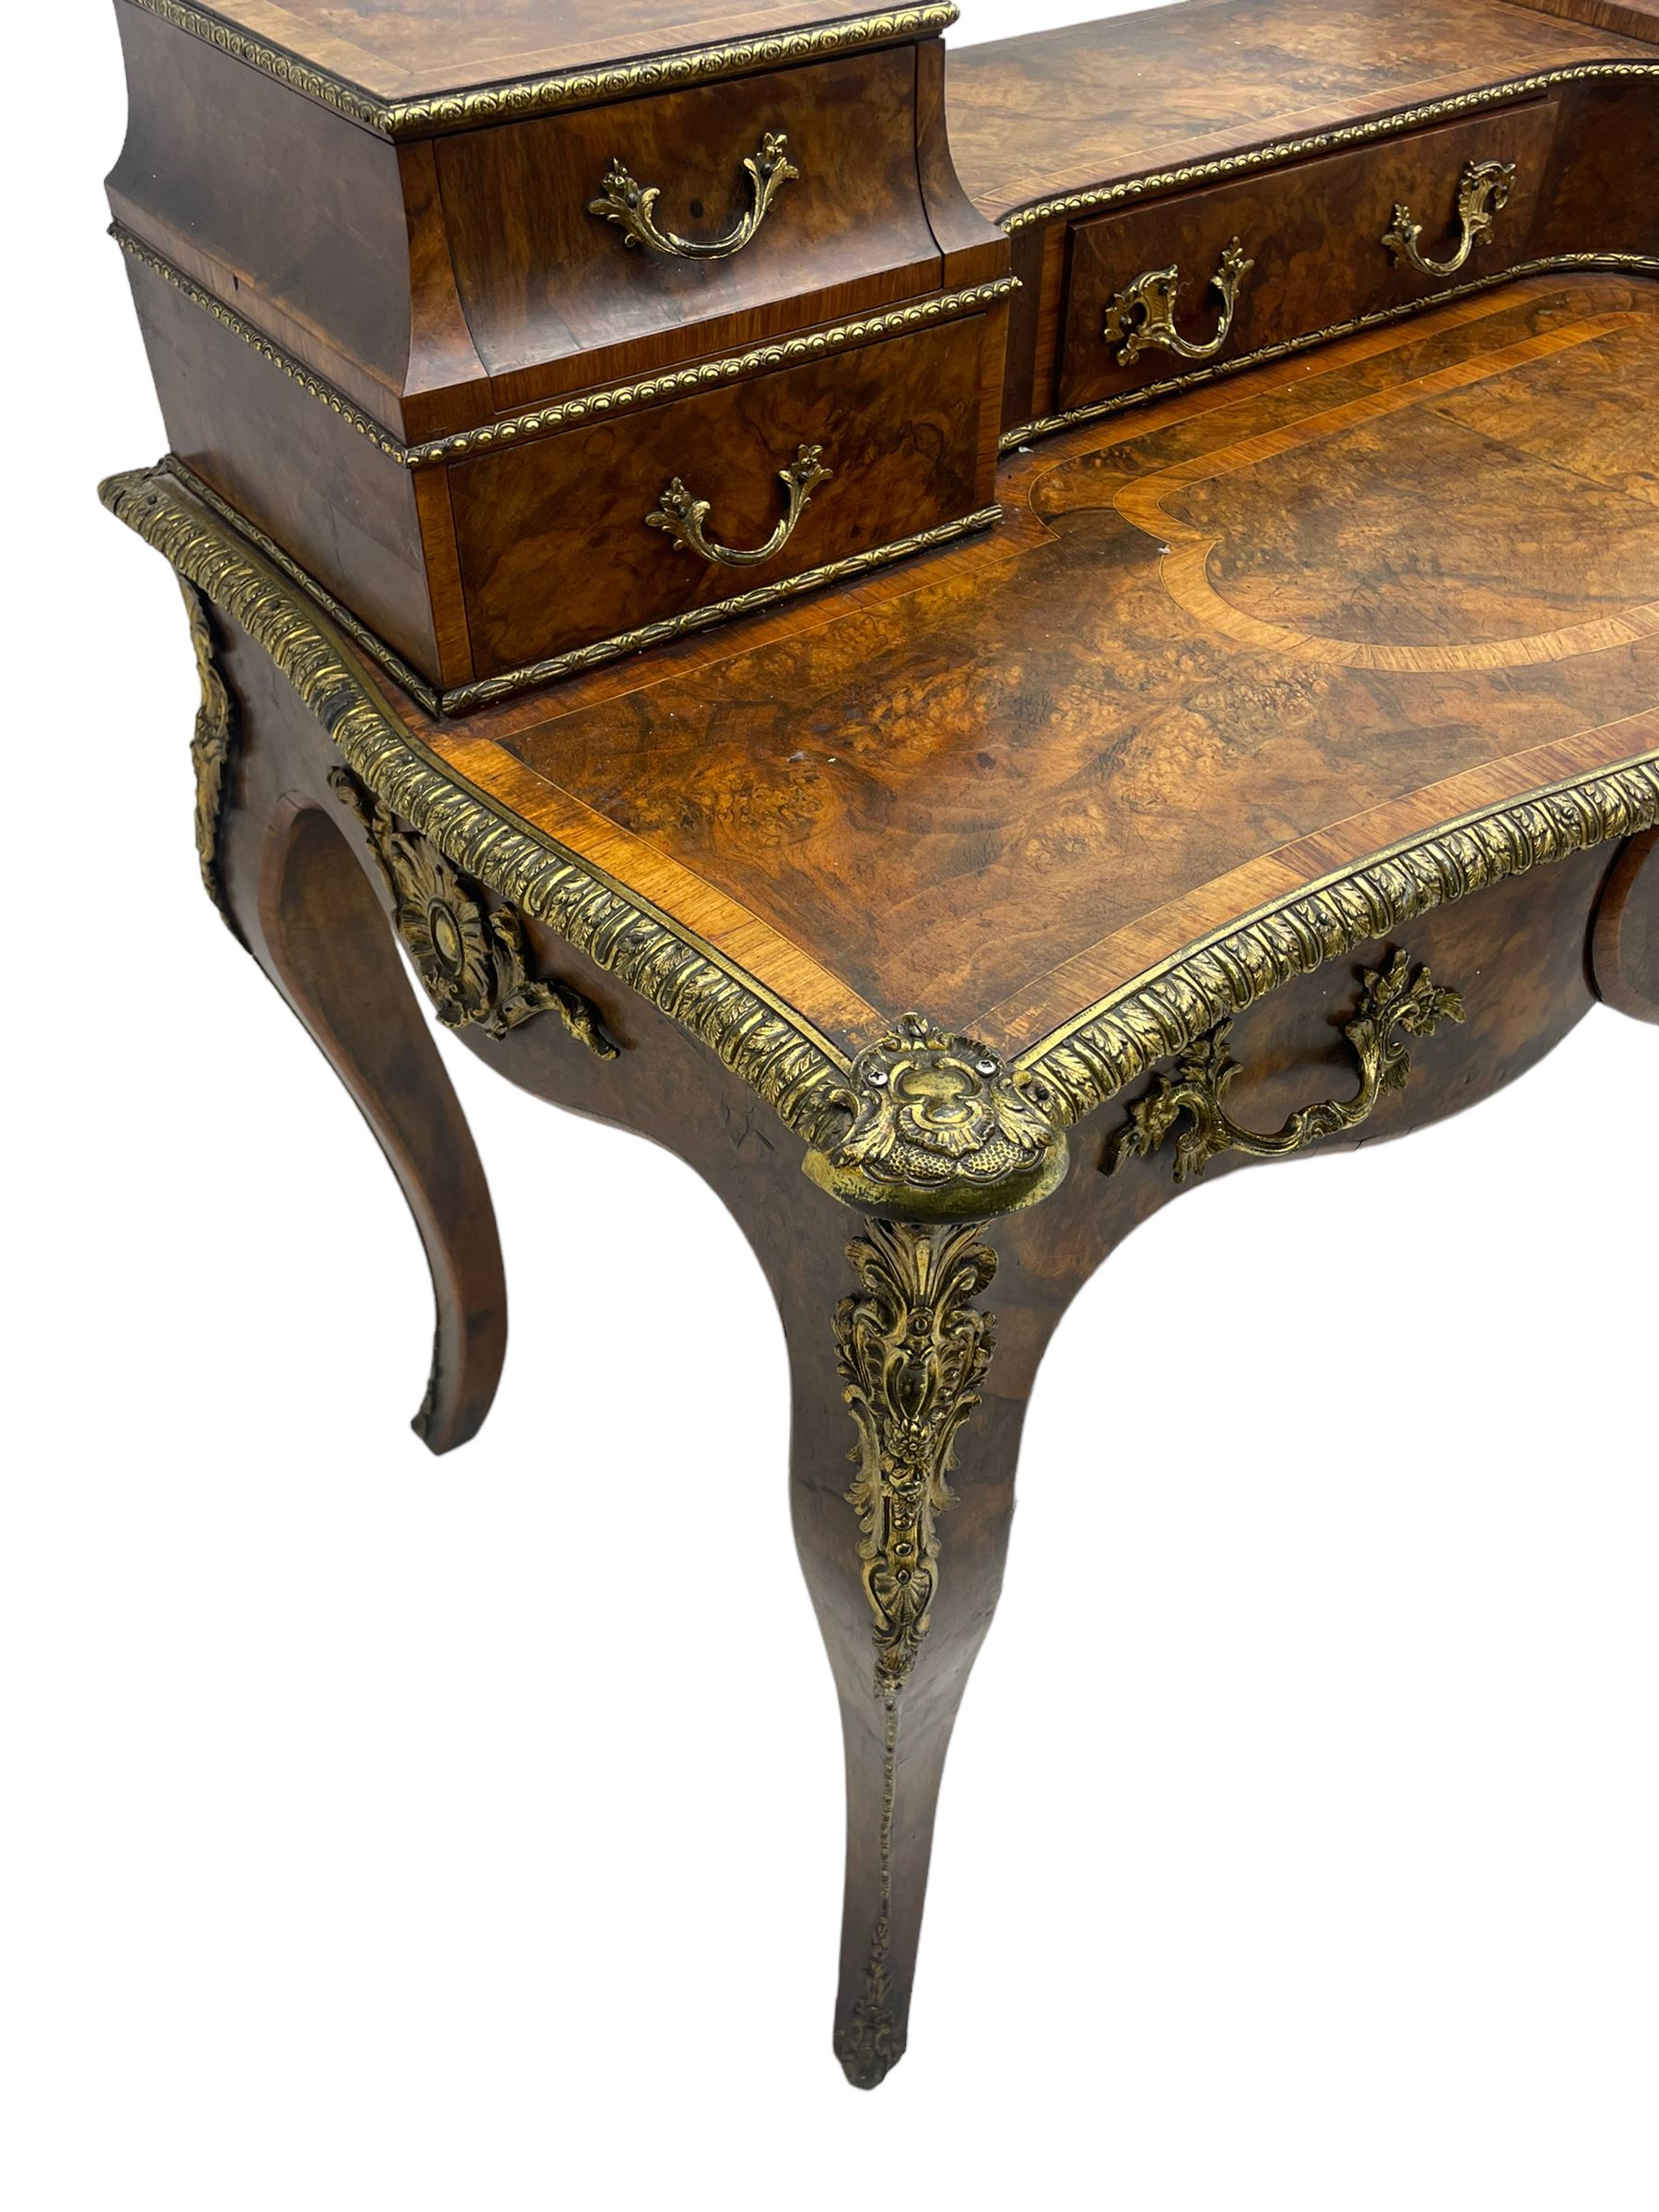 Late 19th to early 20th century French figured walnut writing desk - Image 4 of 13